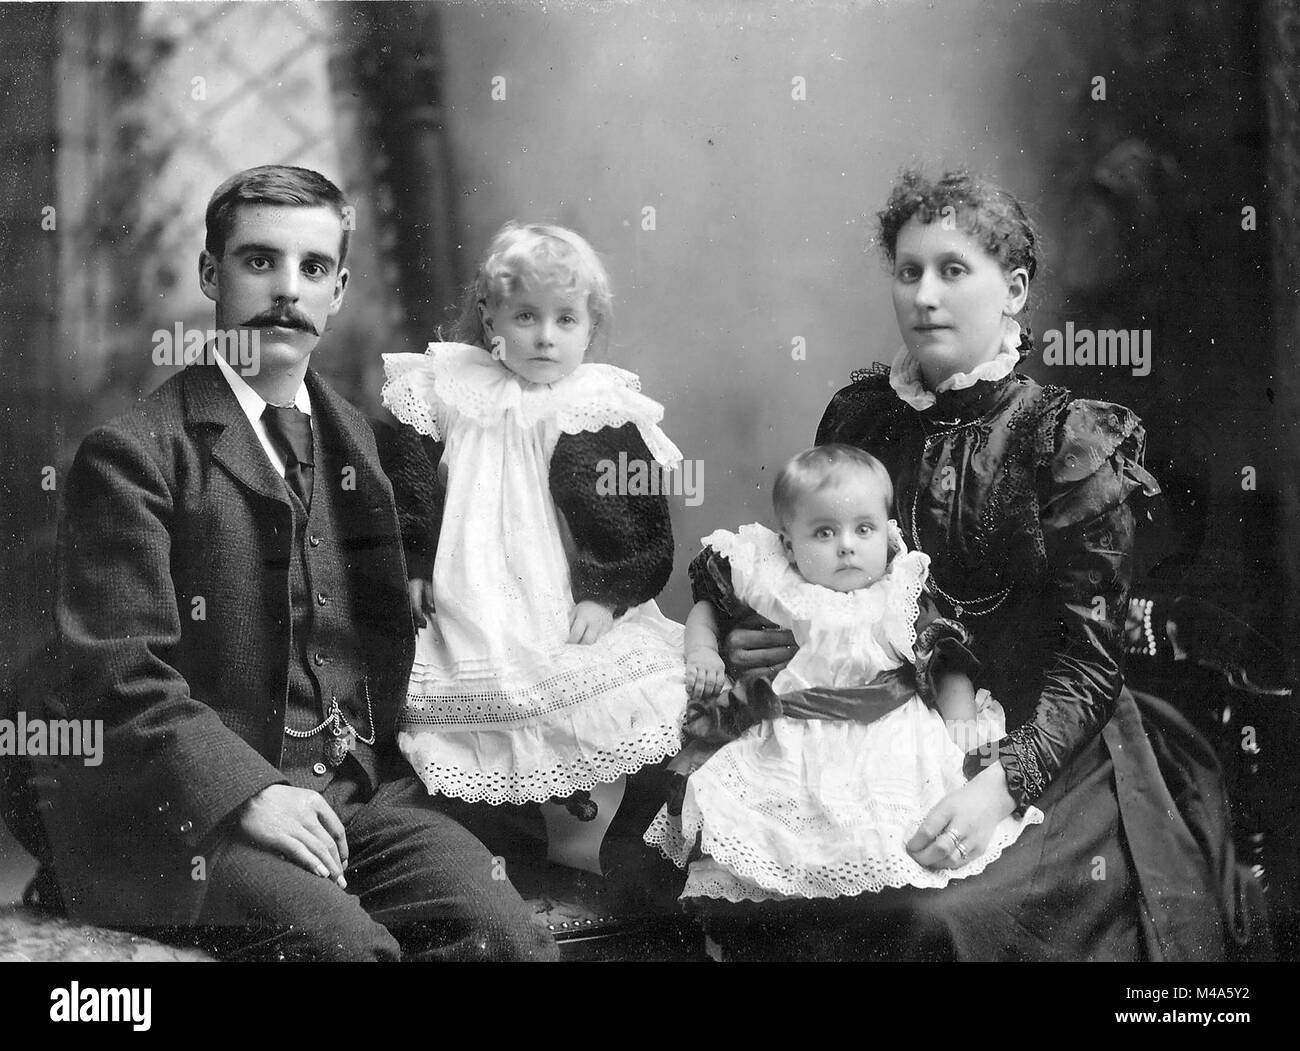 1,057 Victorian Family Portrait Images, Stock Photos, 3D objects